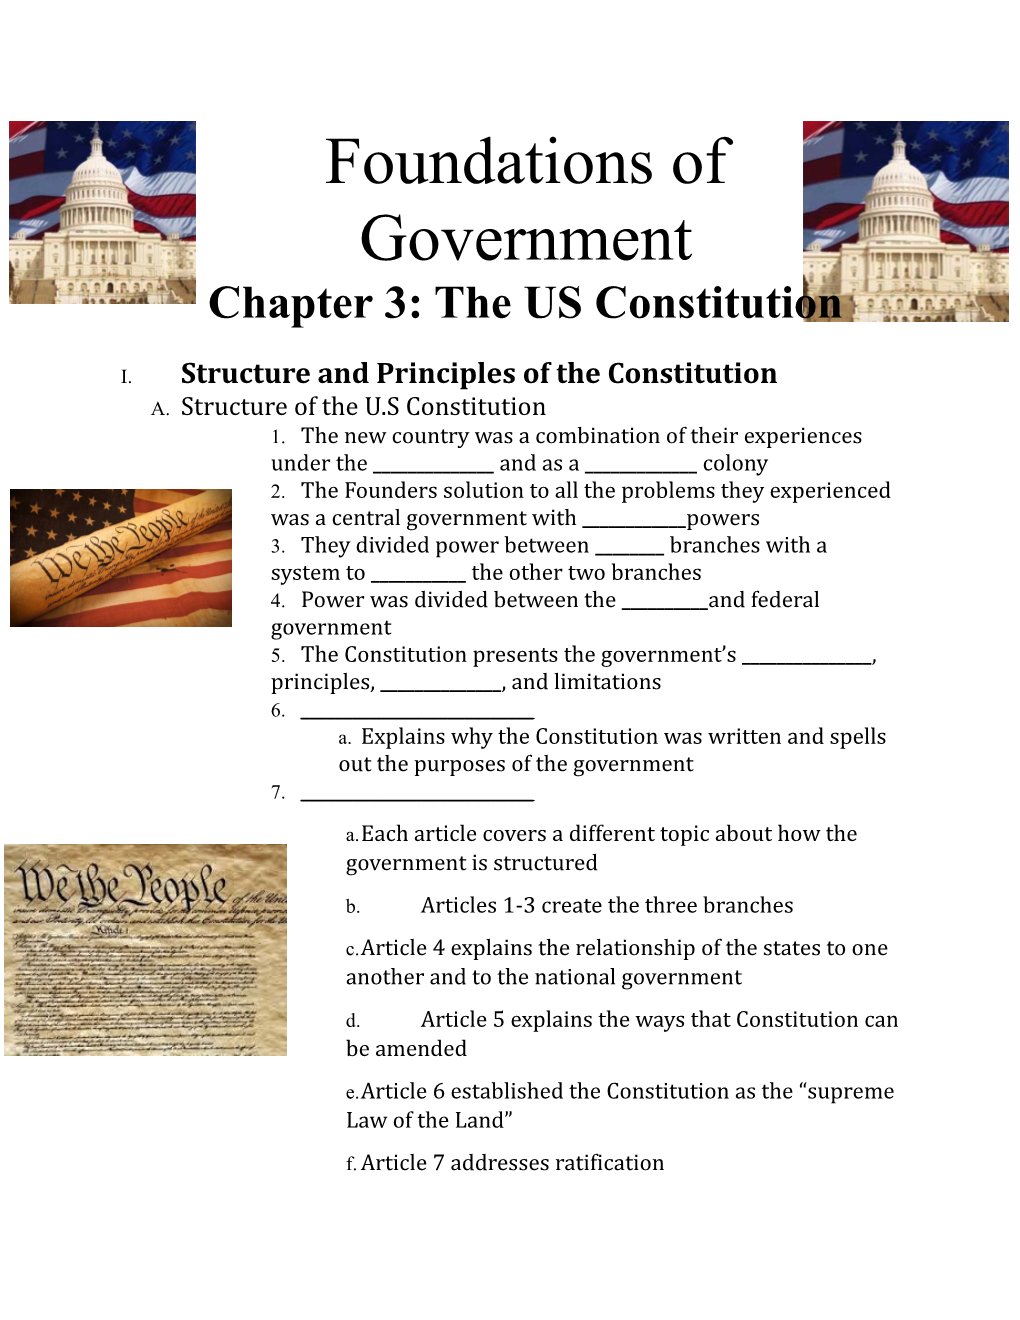 Chapter 3: the US Constitution